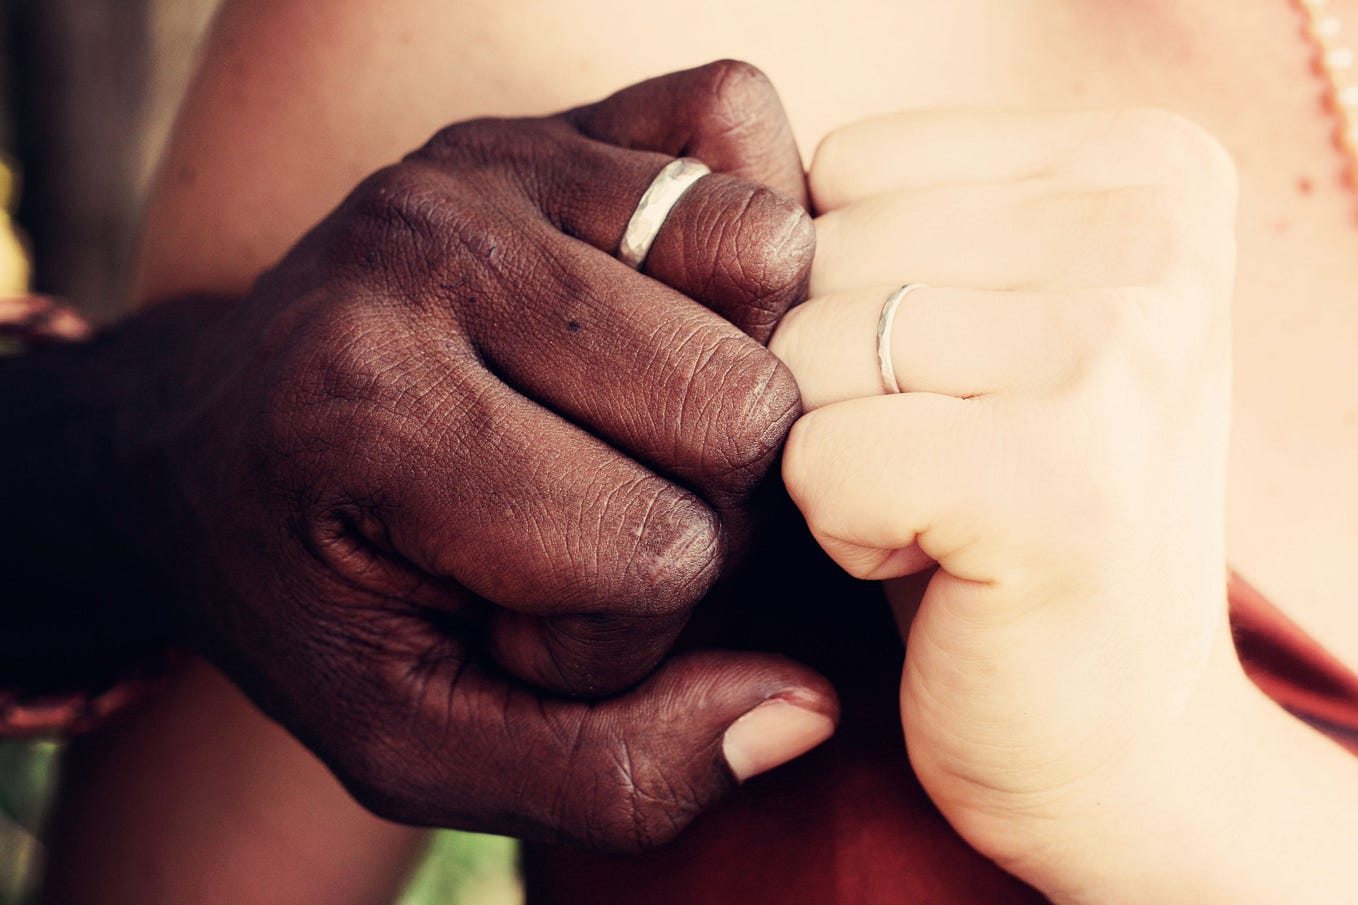 A Black man’s hand and a White woman’s hand coming together in a loving fist bump